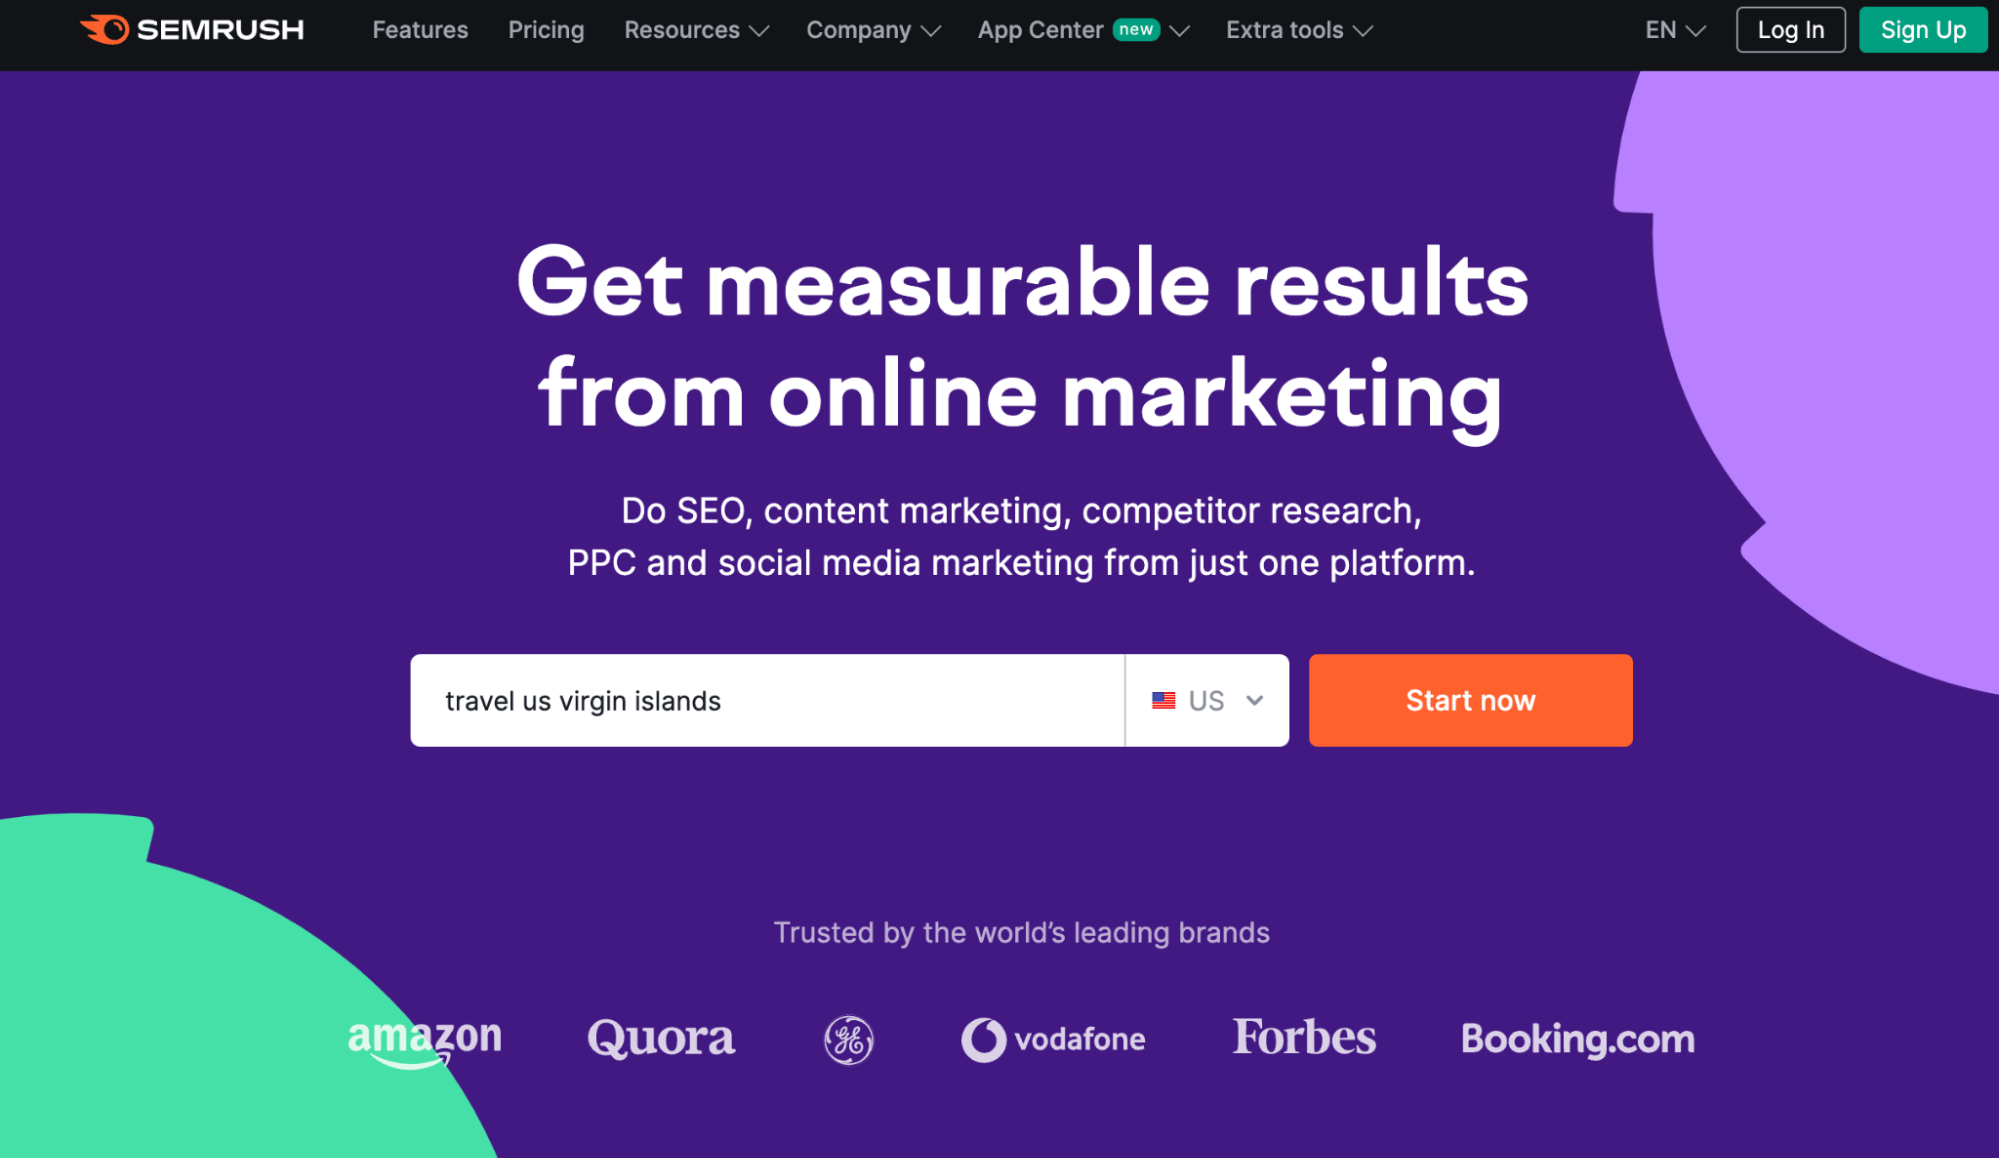 The image displays Semrush's homepage. The headline states, “Get measurable results from online marketing”. 